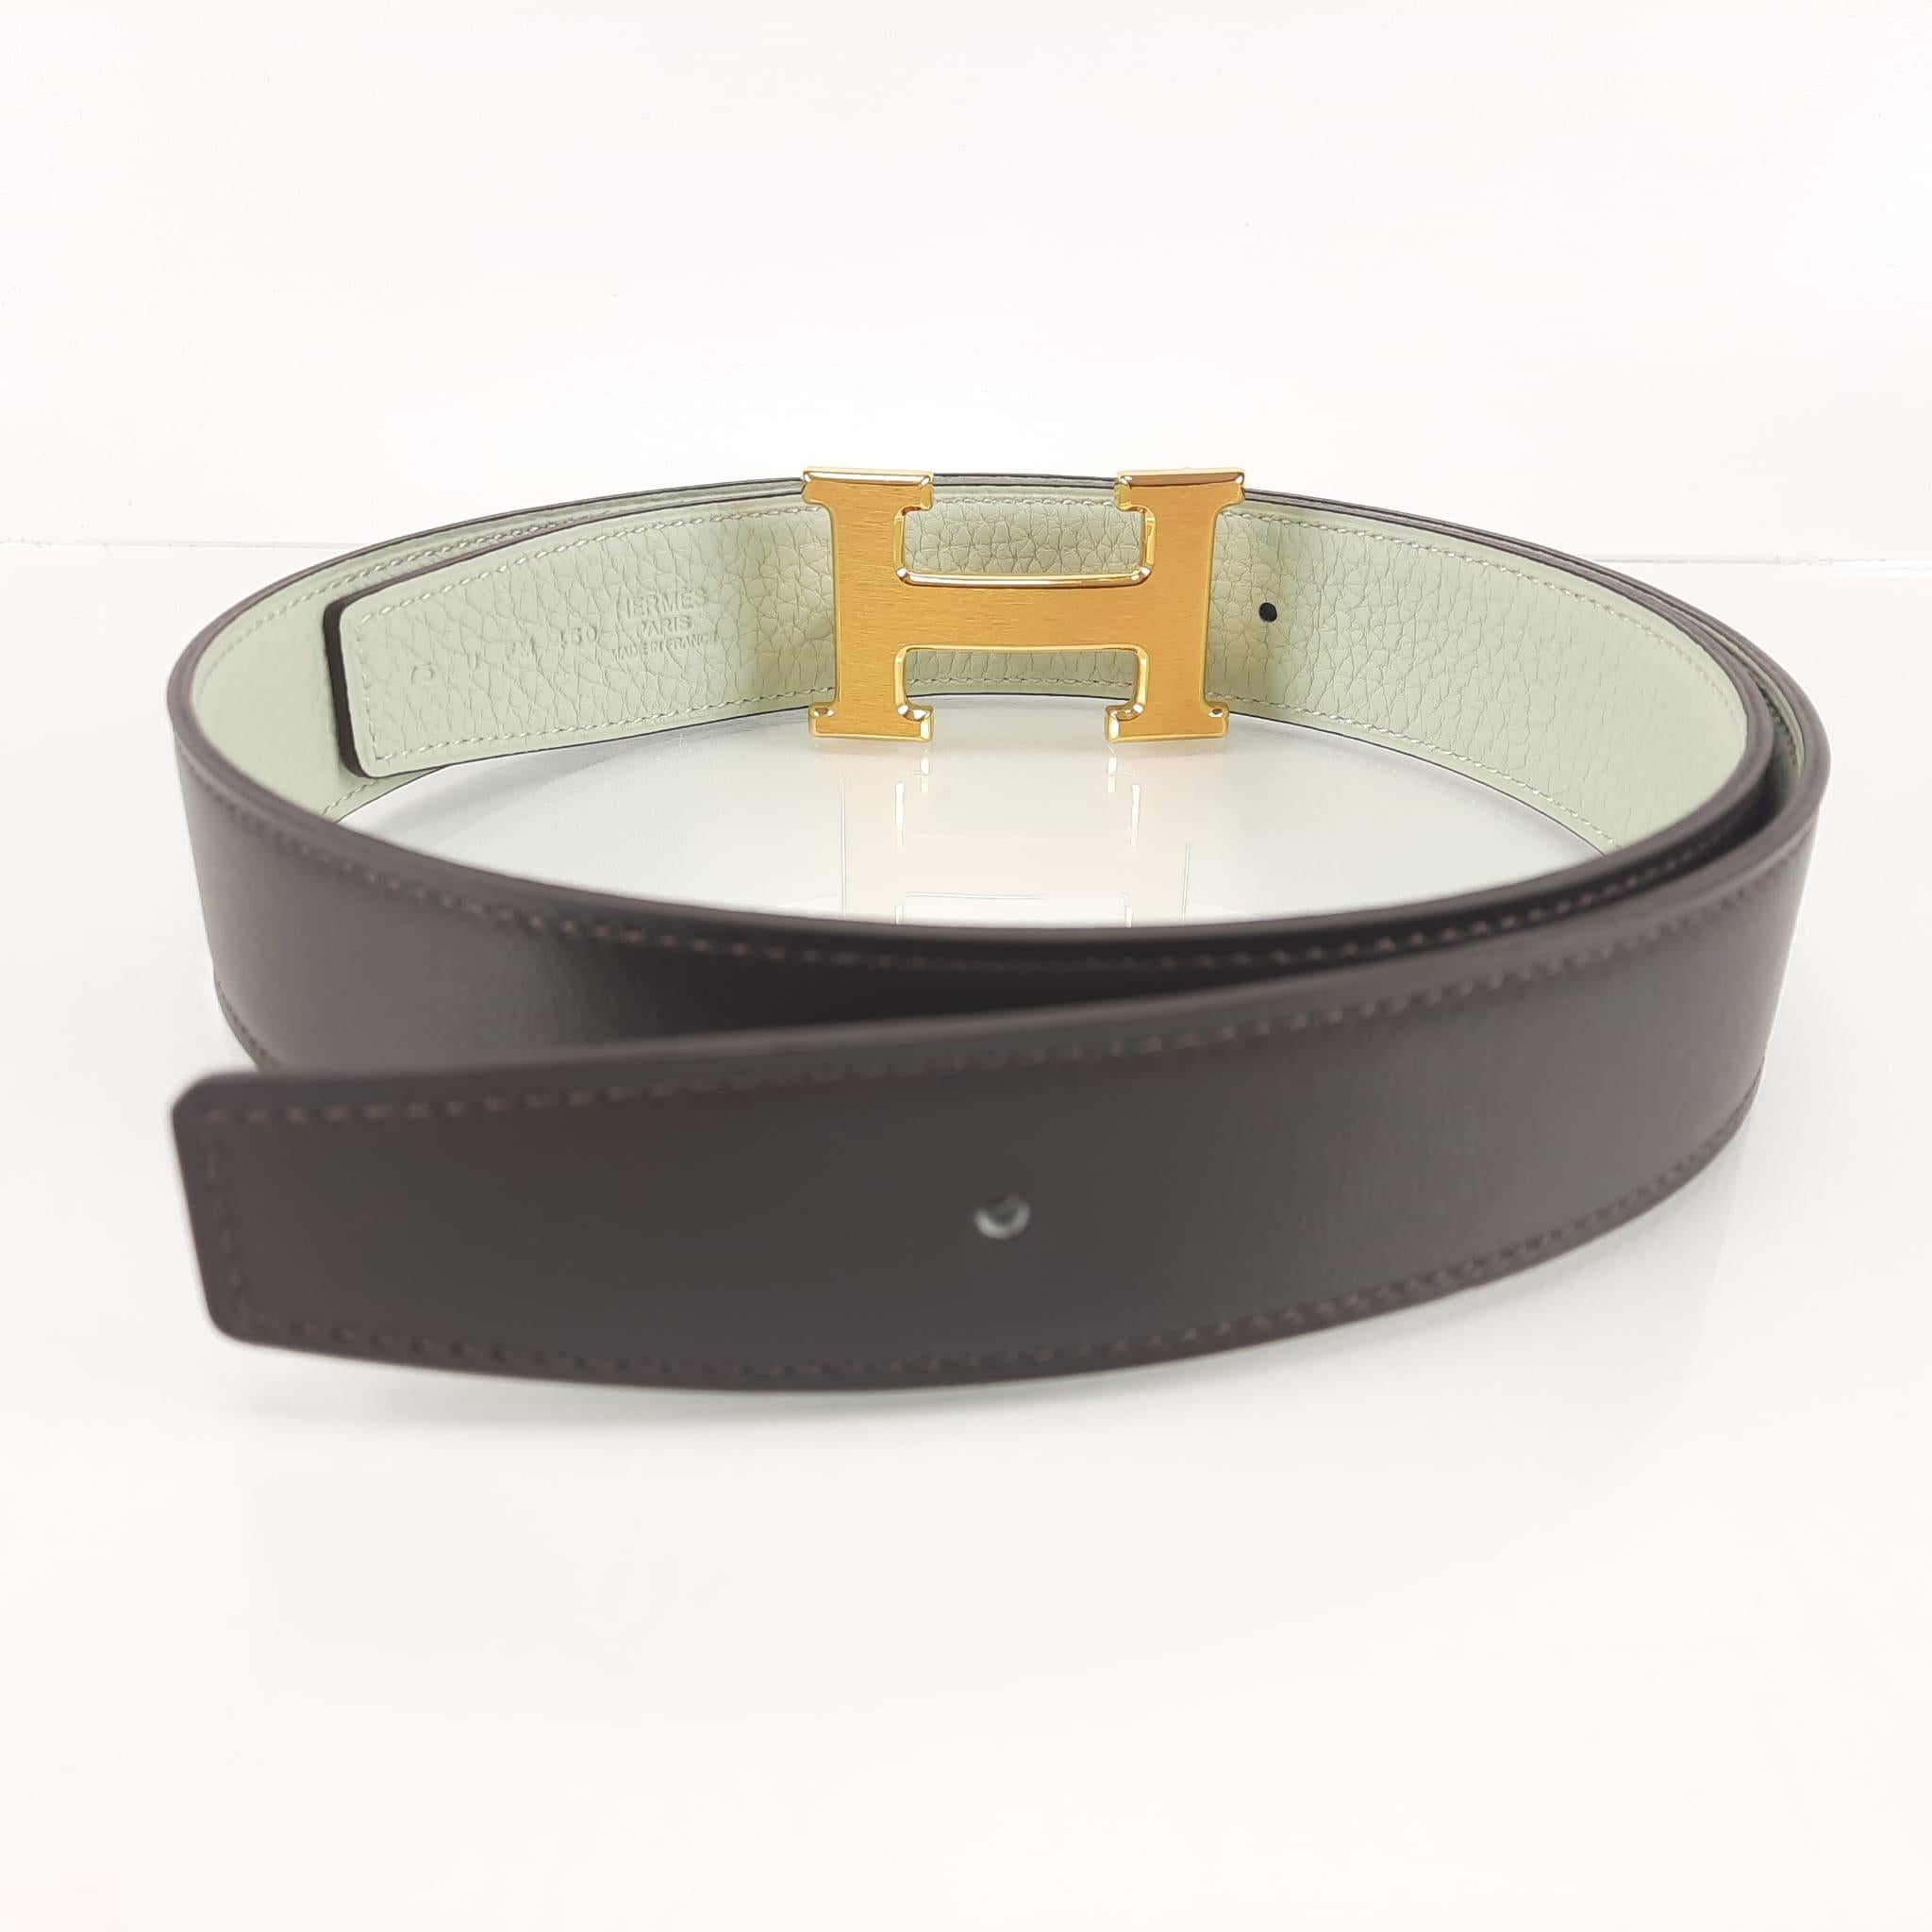 Size 75
Buckle in gold plated metal
& Reversible leather strap in Box 135 and Togo calfskin. Made in France
Width: 32 mm
